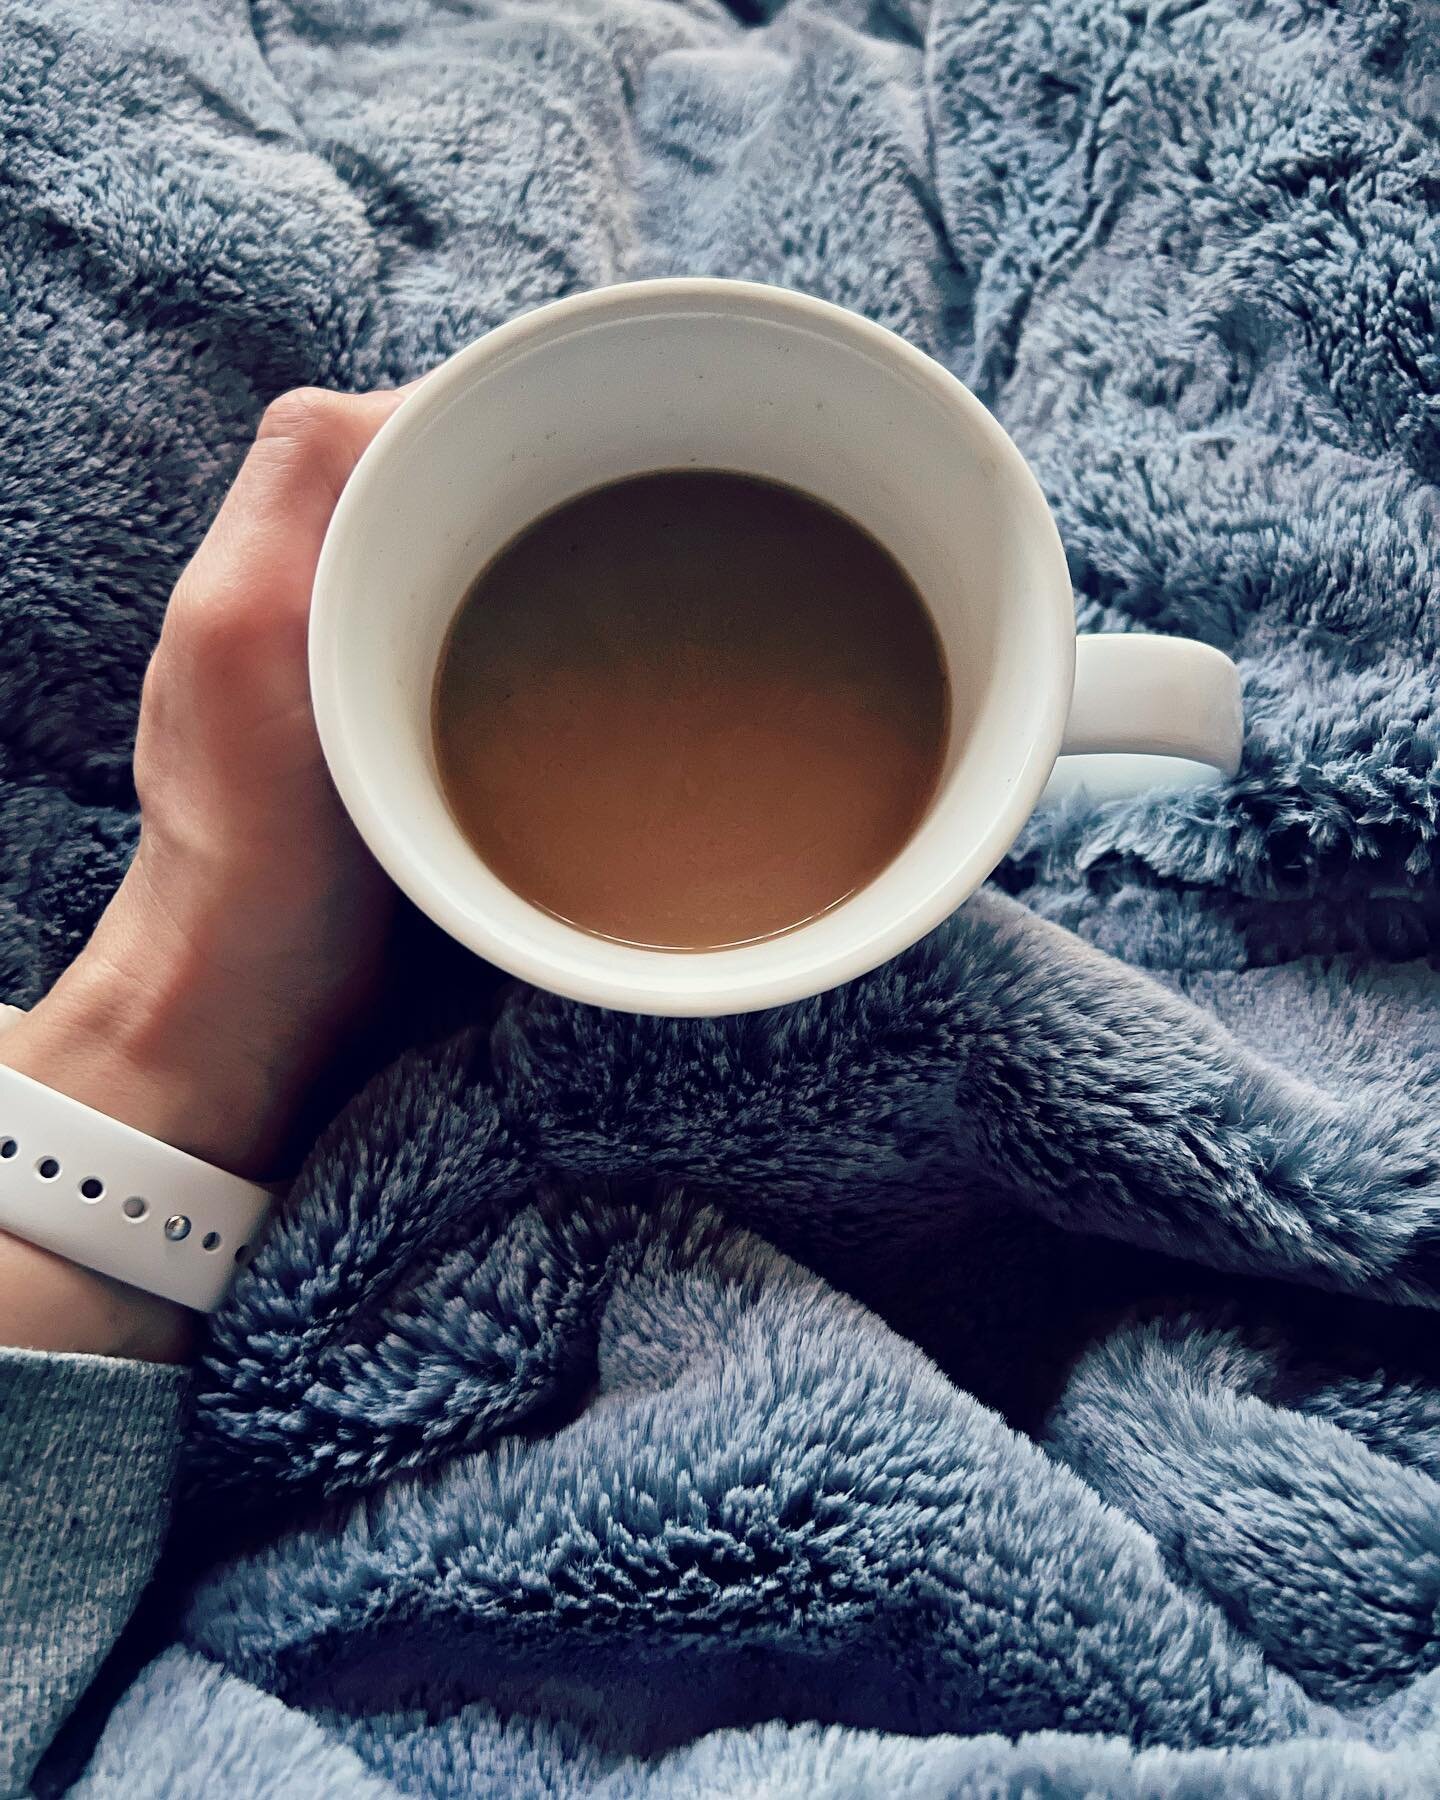 My day doesn&rsquo;t officially start until:

1. I&rsquo;ve had my first cup of ☕️ 
2. I&rsquo;ve meditated for a few minutes
3. I&rsquo;ve practiced my Spanish

Do you have a morning ritual?
Is it grounding?
or is it holding you back out of habit?

